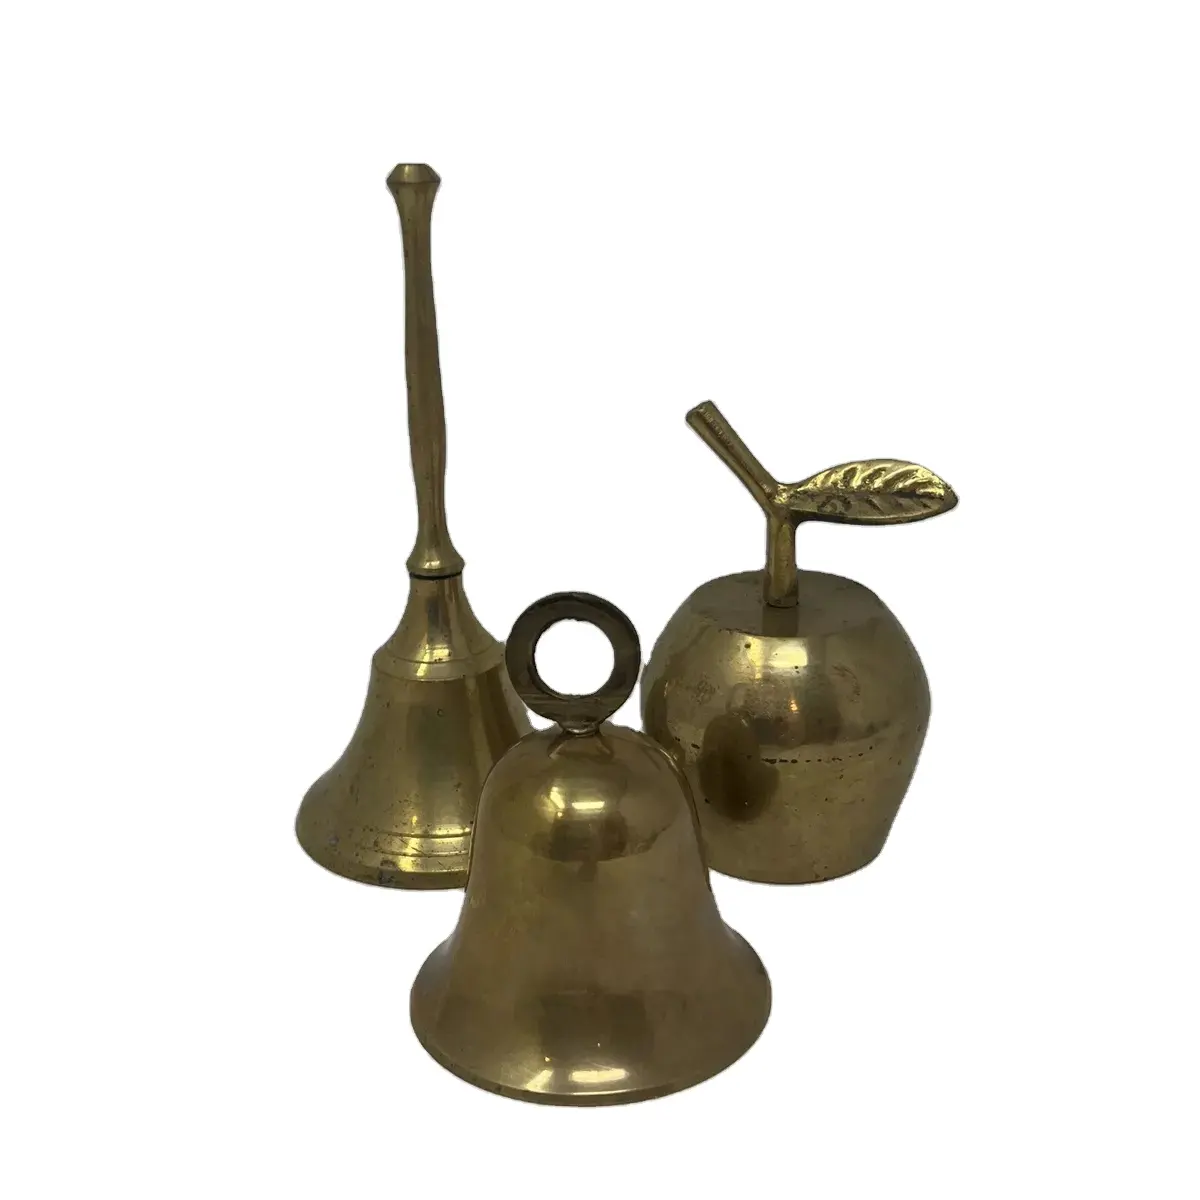 Lot of 3 Vintage Solid Brass Hand Bells School Dinner Apple Bell Simple and Attractive Look Nautical at Best Prices